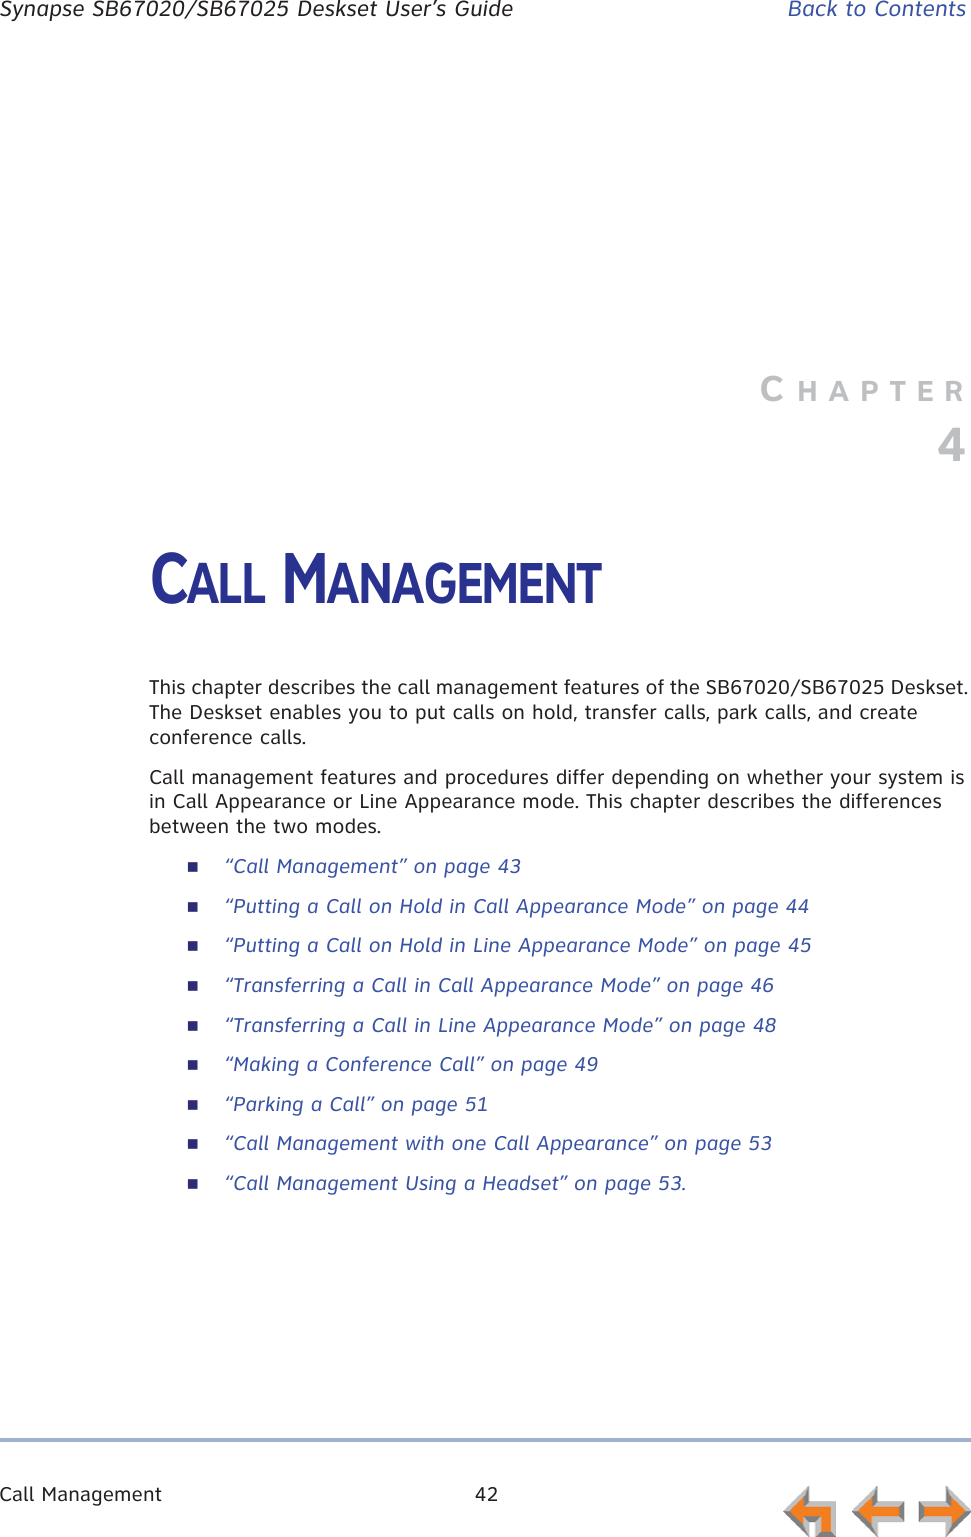 Call Management 42      Synapse SB67020/SB67025 Deskset User’s Guide Back to ContentsCHAPTER4CALL MANAGEMENTThis chapter describes the call management features of the SB67020/SB67025 Deskset. The Deskset enables you to put calls on hold, transfer calls, park calls, and create conference calls.Call management features and procedures differ depending on whether your system is in Call Appearance or Line Appearance mode. This chapter describes the differences between the two modes.“Call Management” on page 43“Putting a Call on Hold in Call Appearance Mode” on page 44“Putting a Call on Hold in Line Appearance Mode” on page 45“Transferring a Call in Call Appearance Mode” on page 46“Transferring a Call in Line Appearance Mode” on page 48“Making a Conference Call” on page 49“Parking a Call” on page 51“Call Management with one Call Appearance” on page 53“Call Management Using a Headset” on page 53.